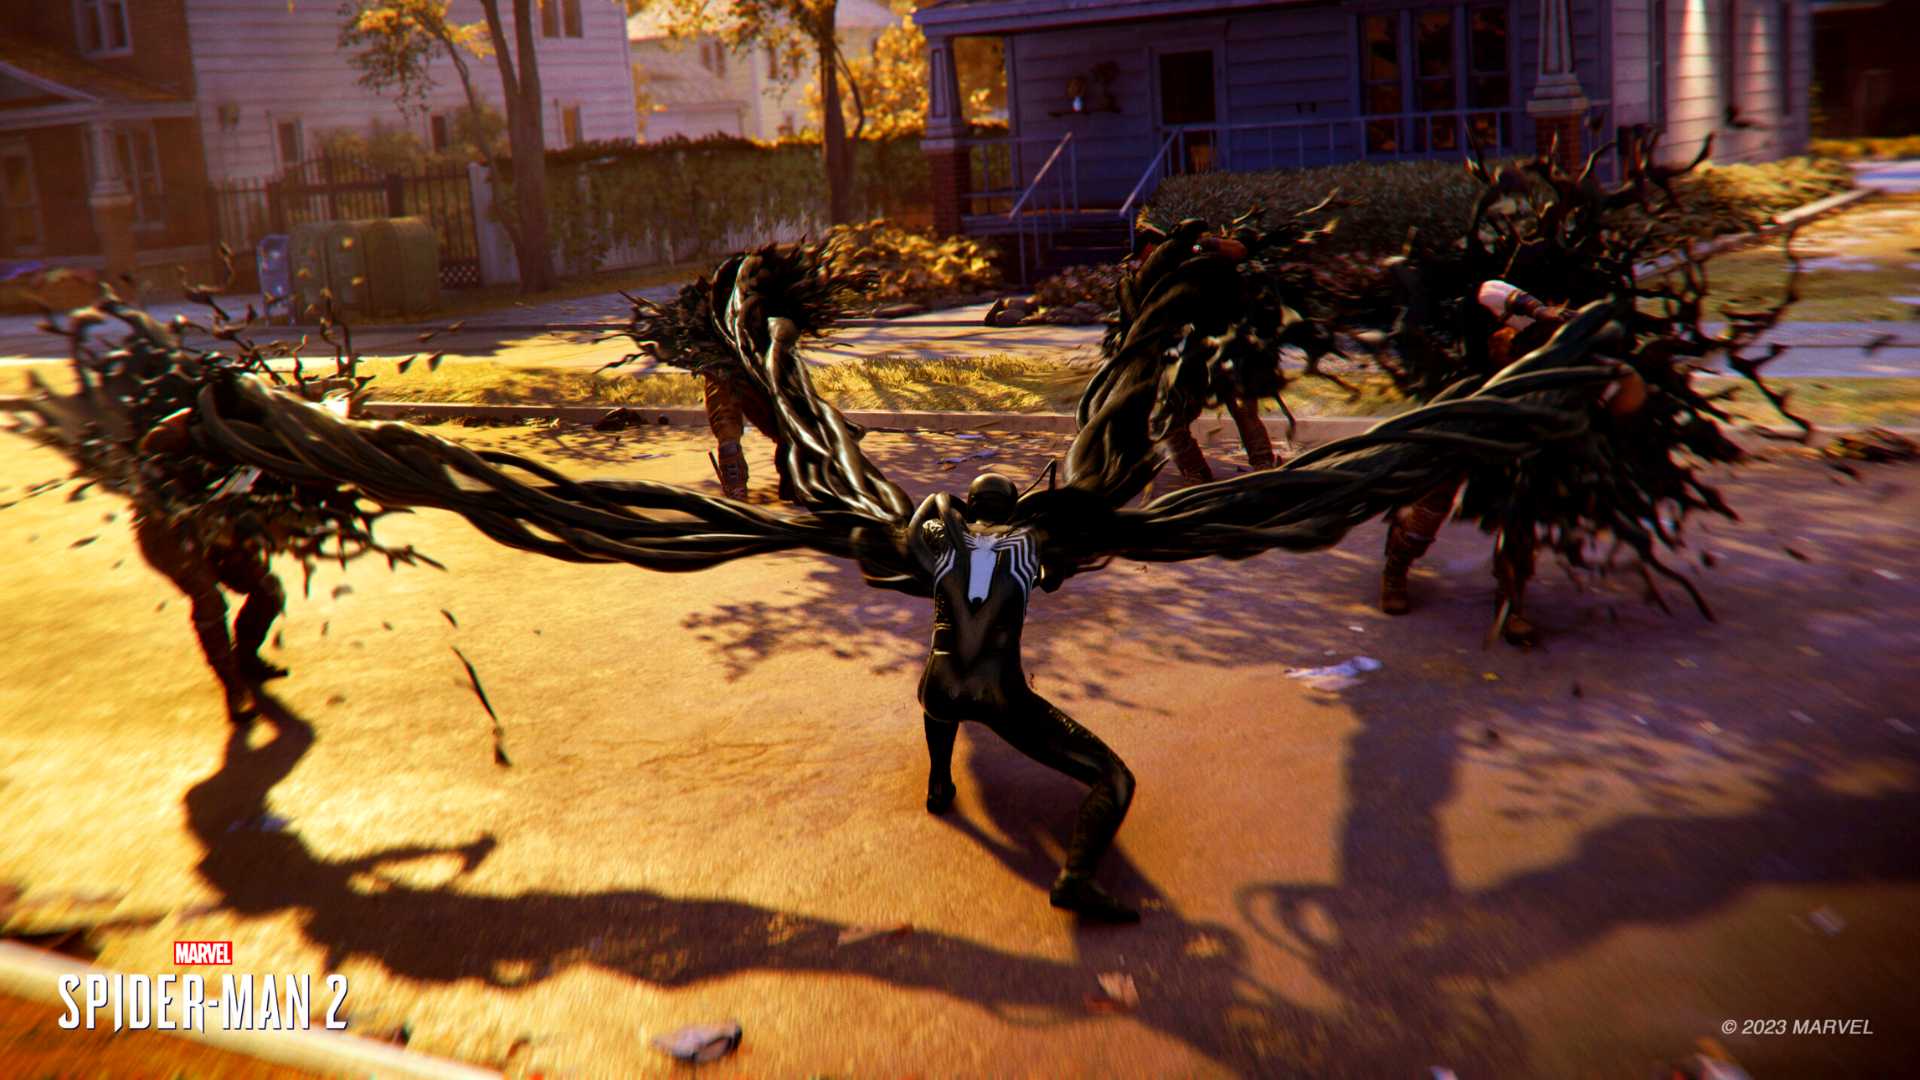 The Symbiote feels alive in Marvel's Spider-Man 2, featuring gameplay reminiscent of Web of Shadows and Shattered Dimensions.